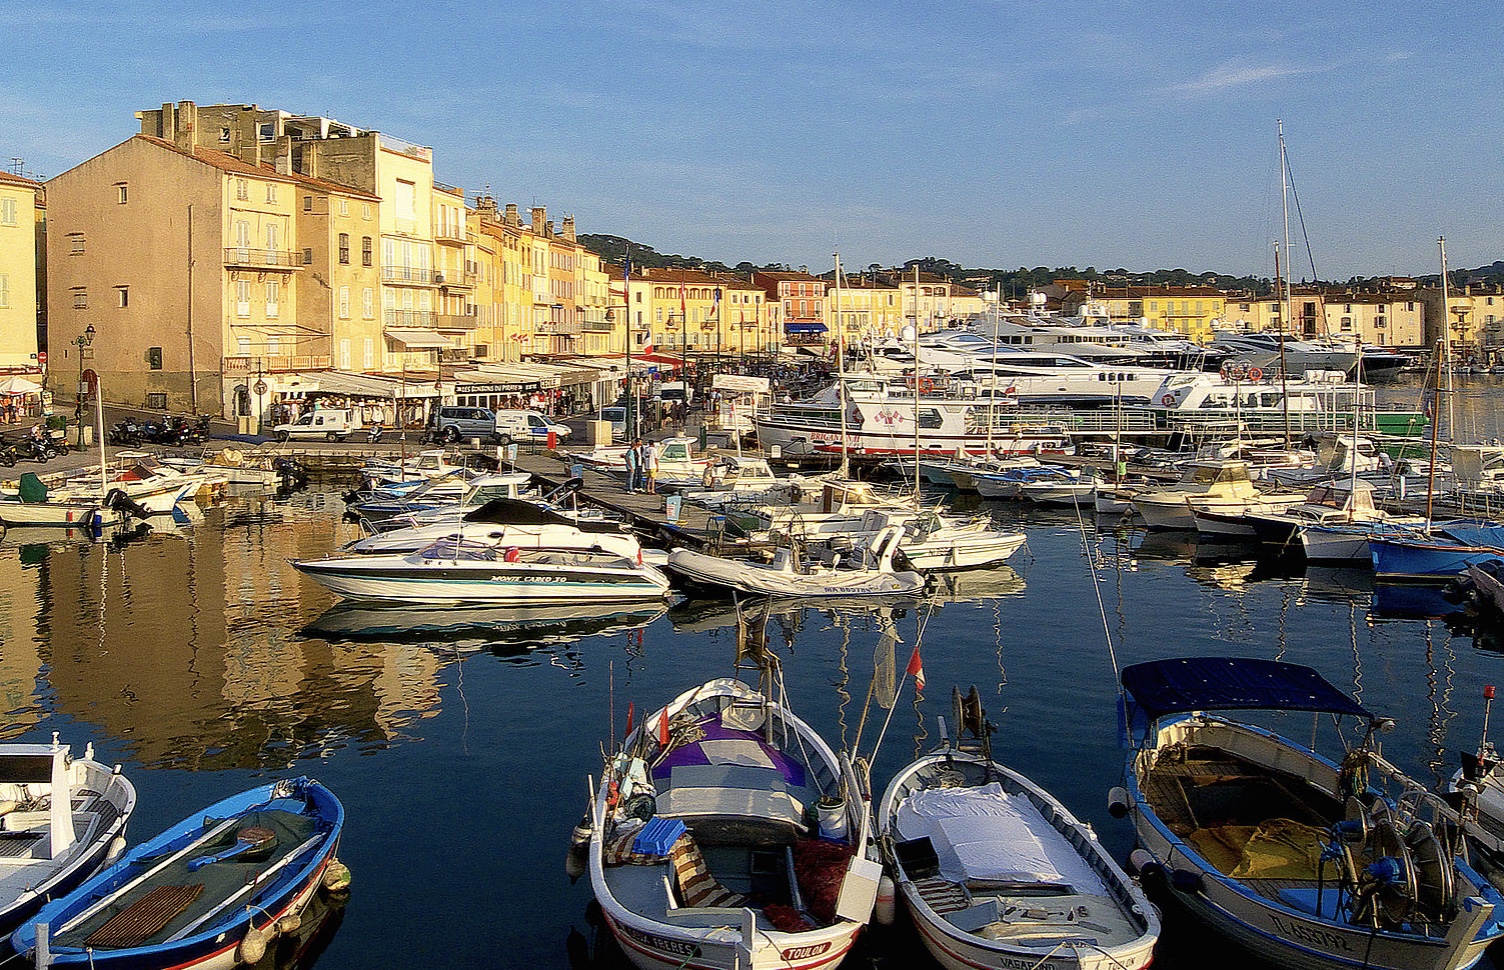 7 Things to Do In The French Riviera